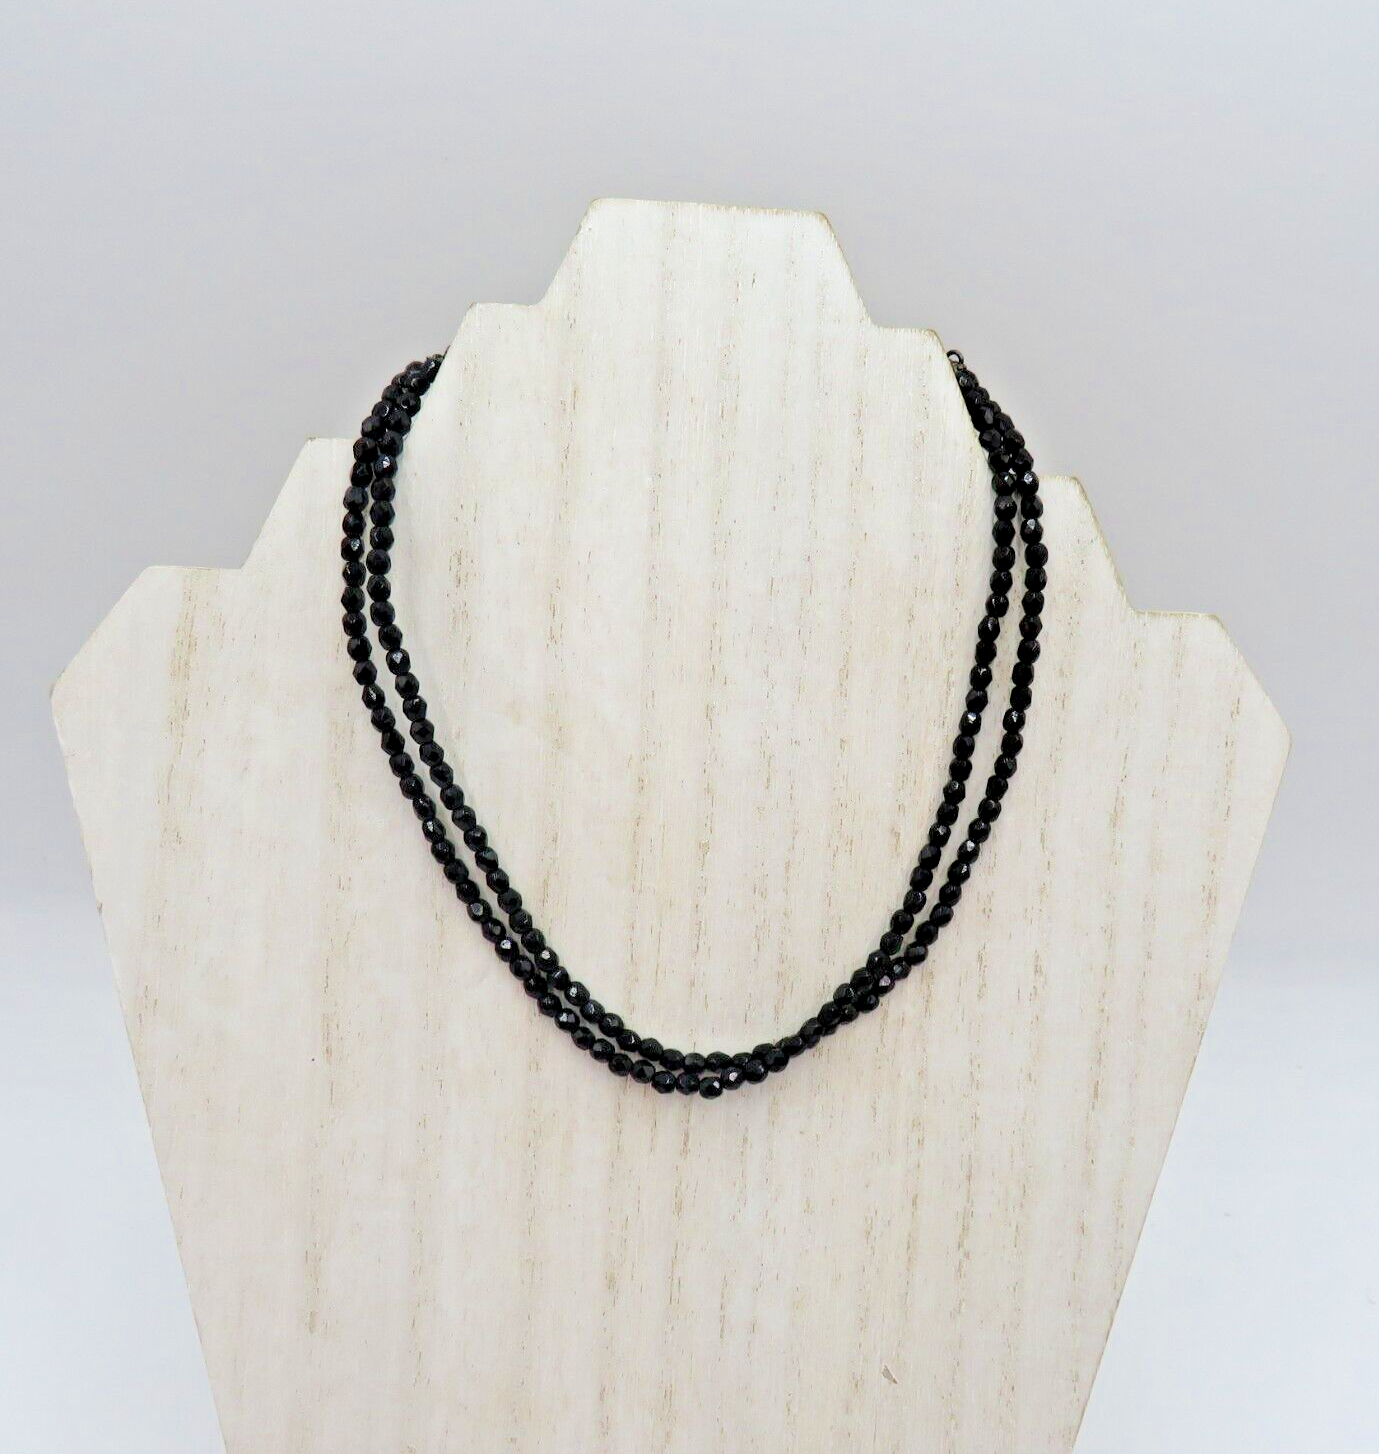 Primary image for 1928 Necklace Gun Metal Gray Tone Chain 16" Double Strand Black Beads